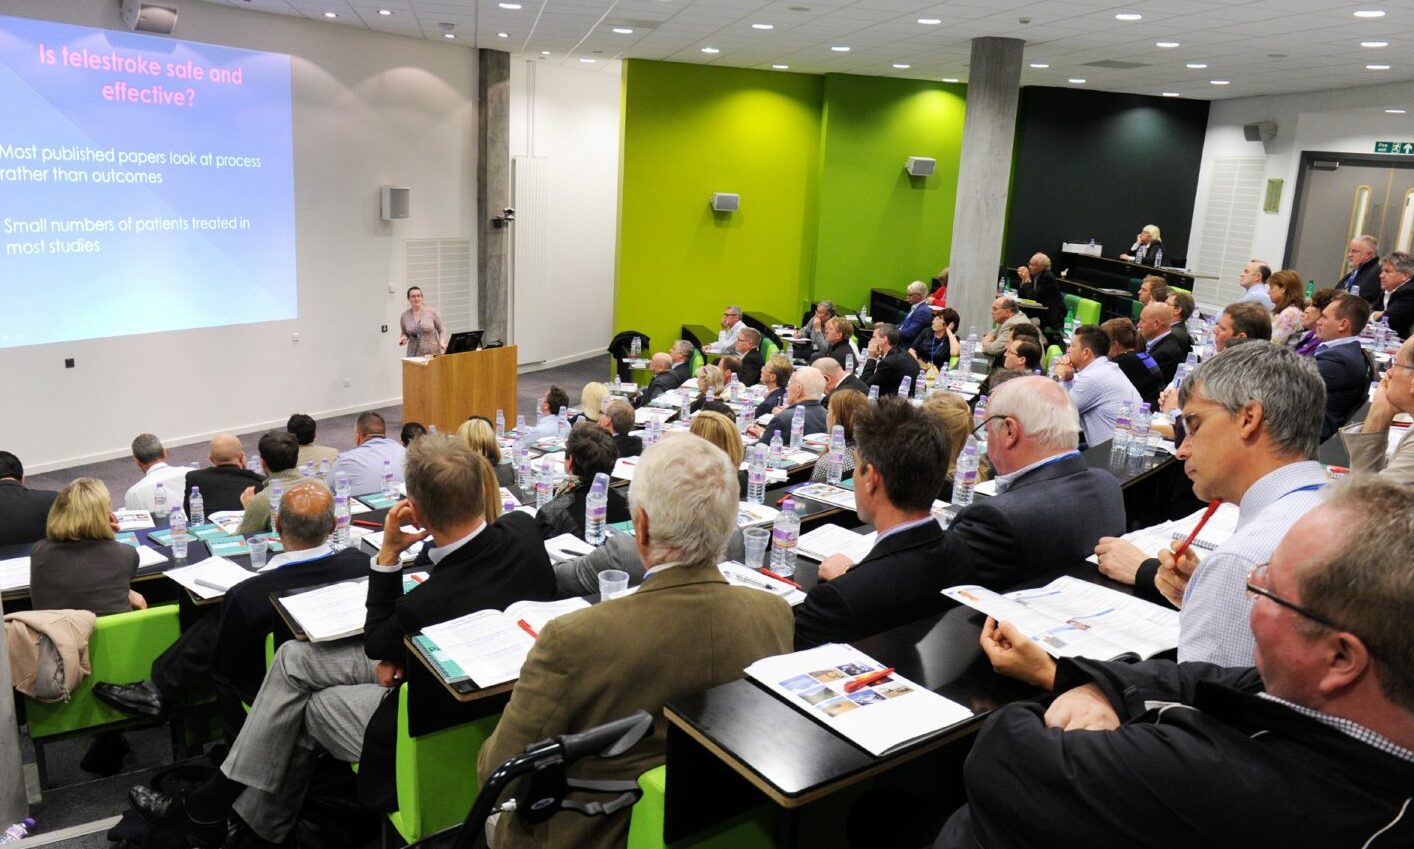 Delegates attend a healthcare conference at The Suttie Centre, which also houses the anatomy department. Picture by Colin Rennie.